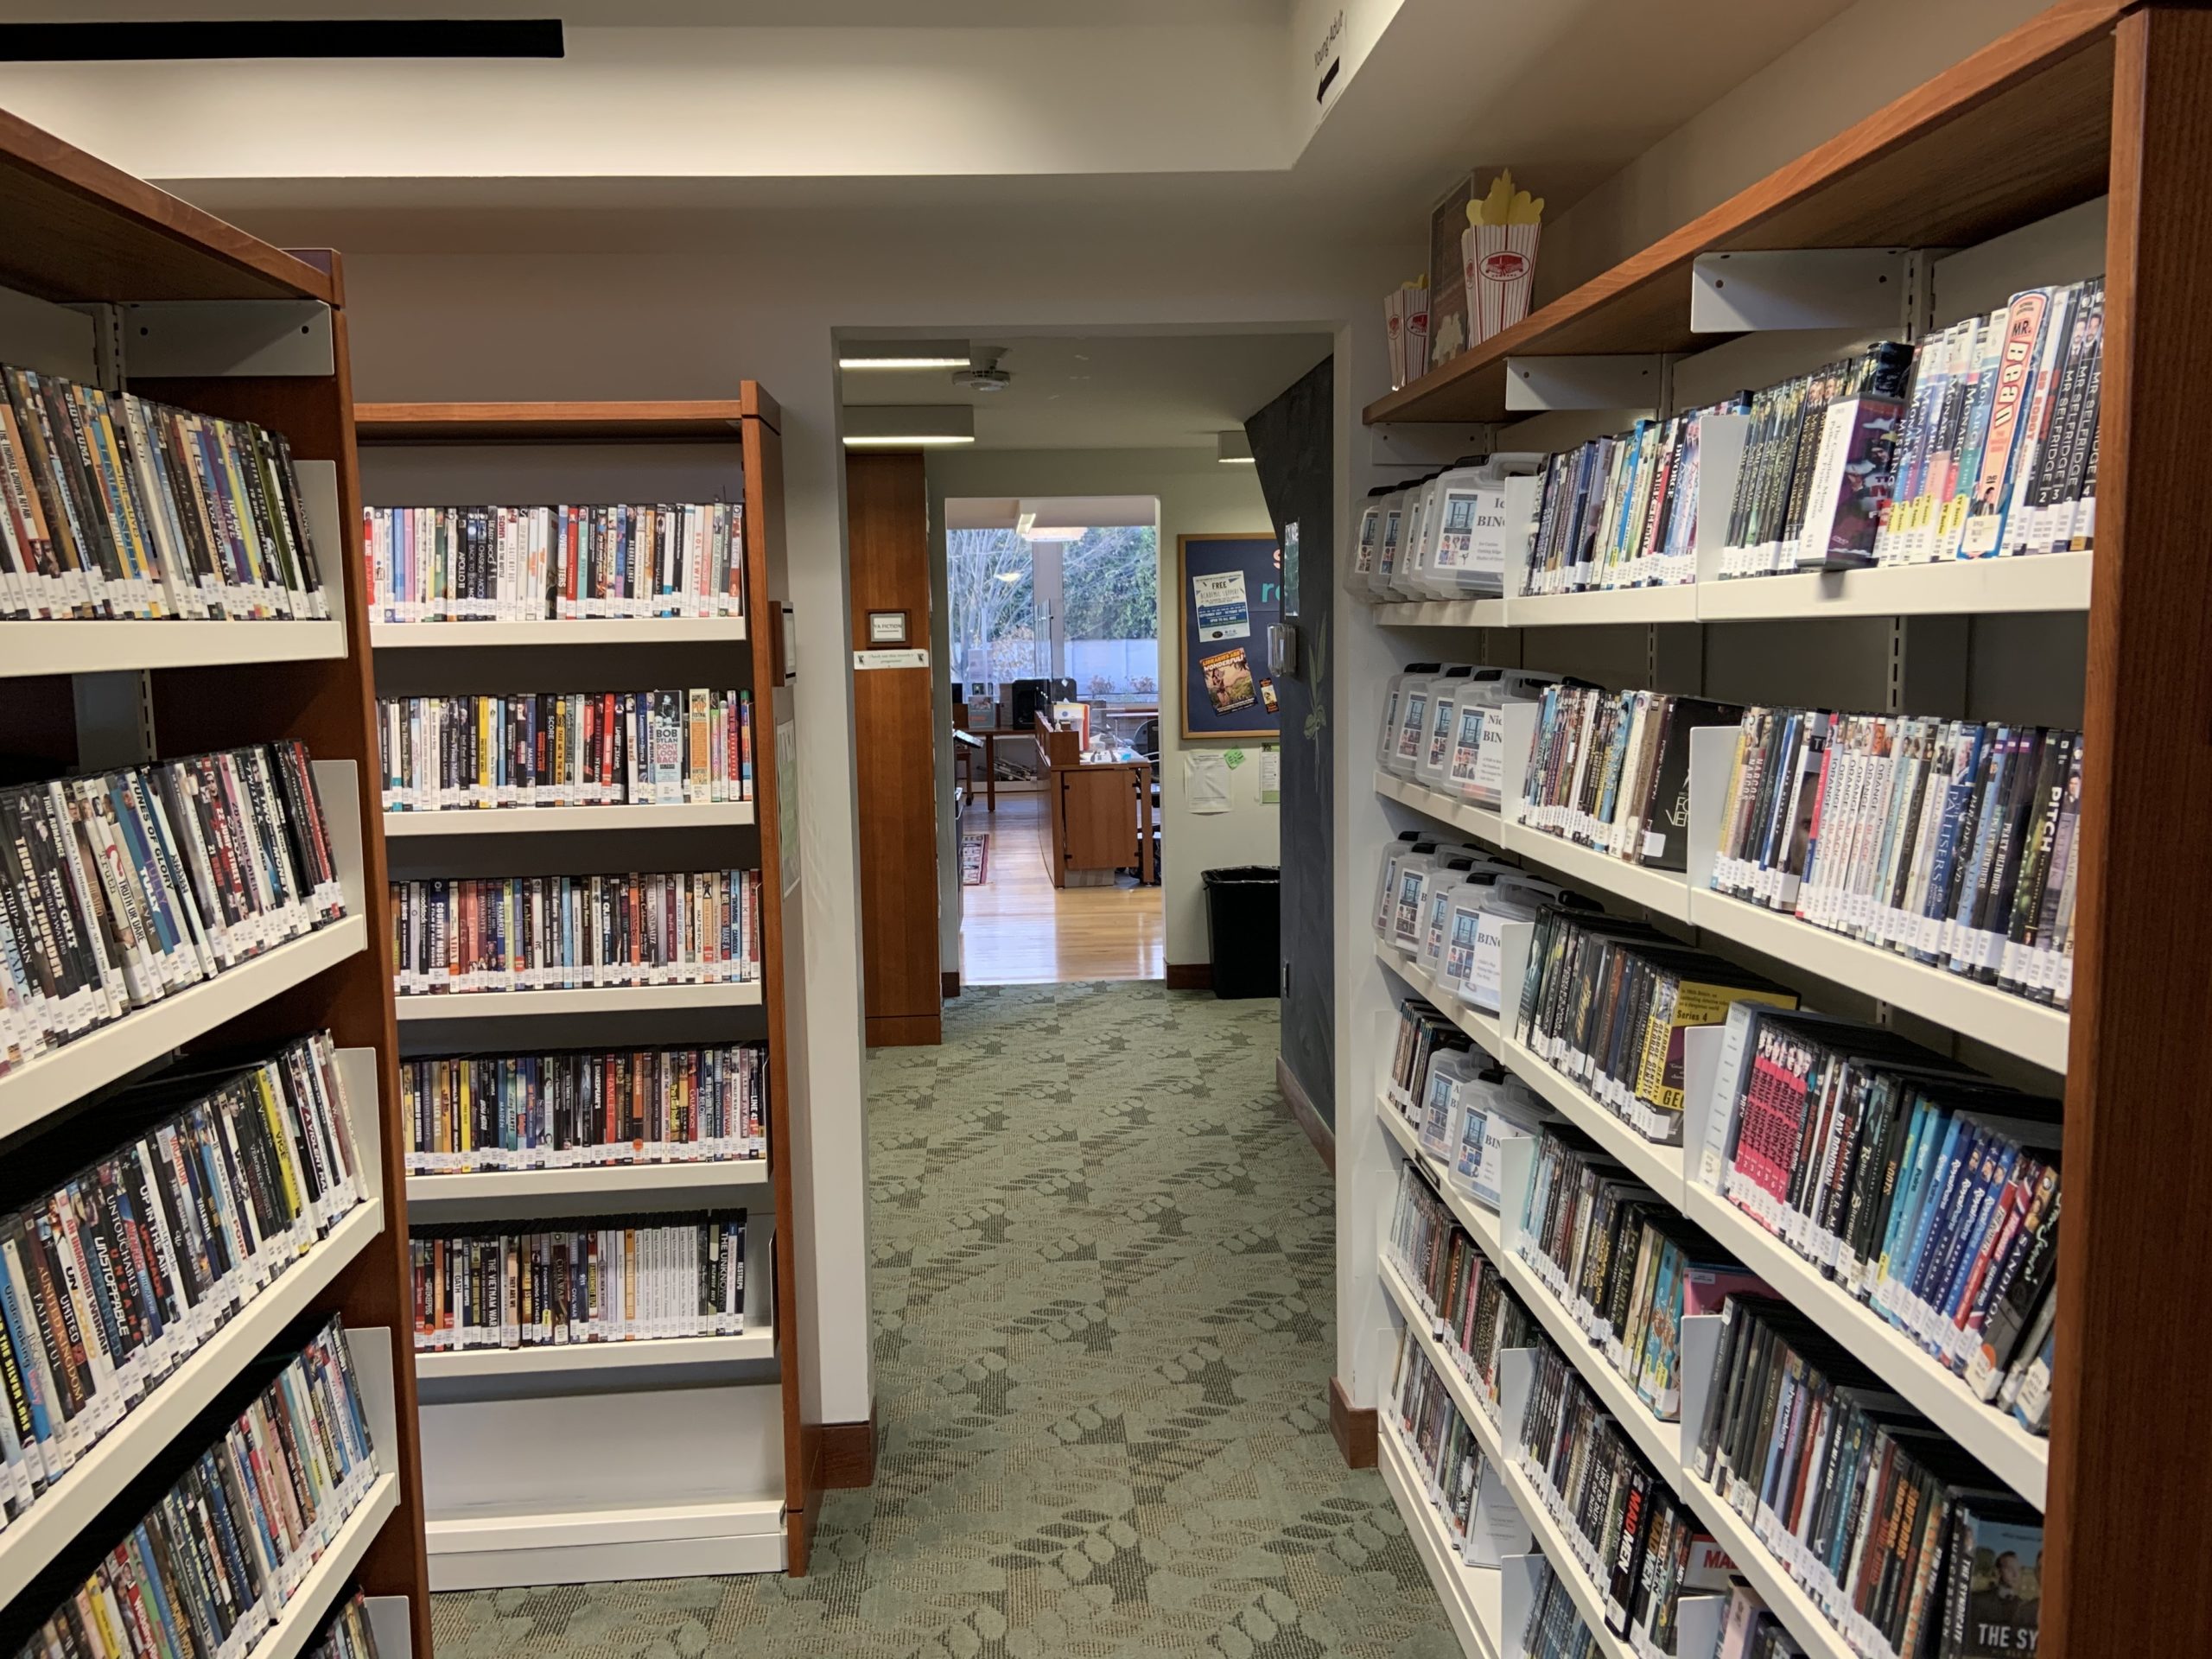 The Hampton Library's Arlene and Alan Alda Young Adult Room, which occupies a small area beyond these stacks, will be expanded as part of the renovation plans. STEPHEN J. KOTZ